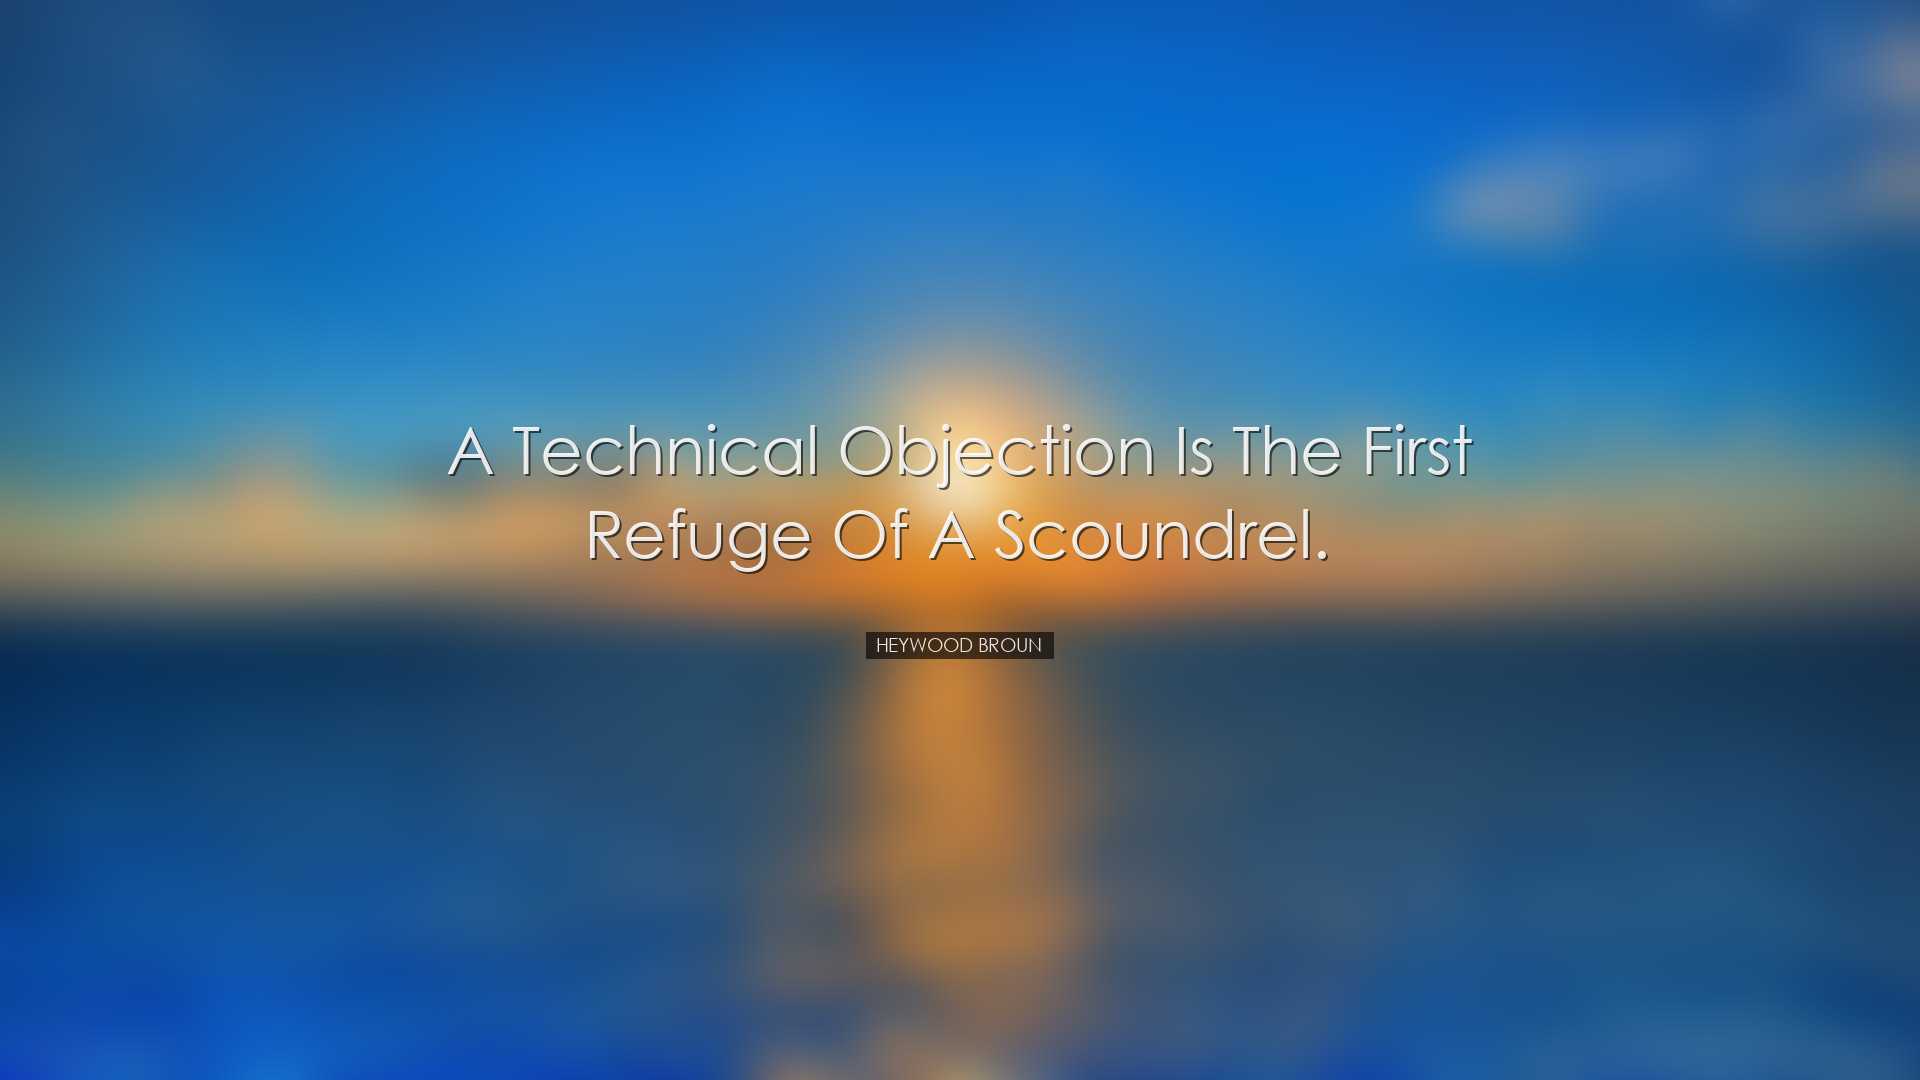 A technical objection is the first refuge of a scoundrel. - Heywoo